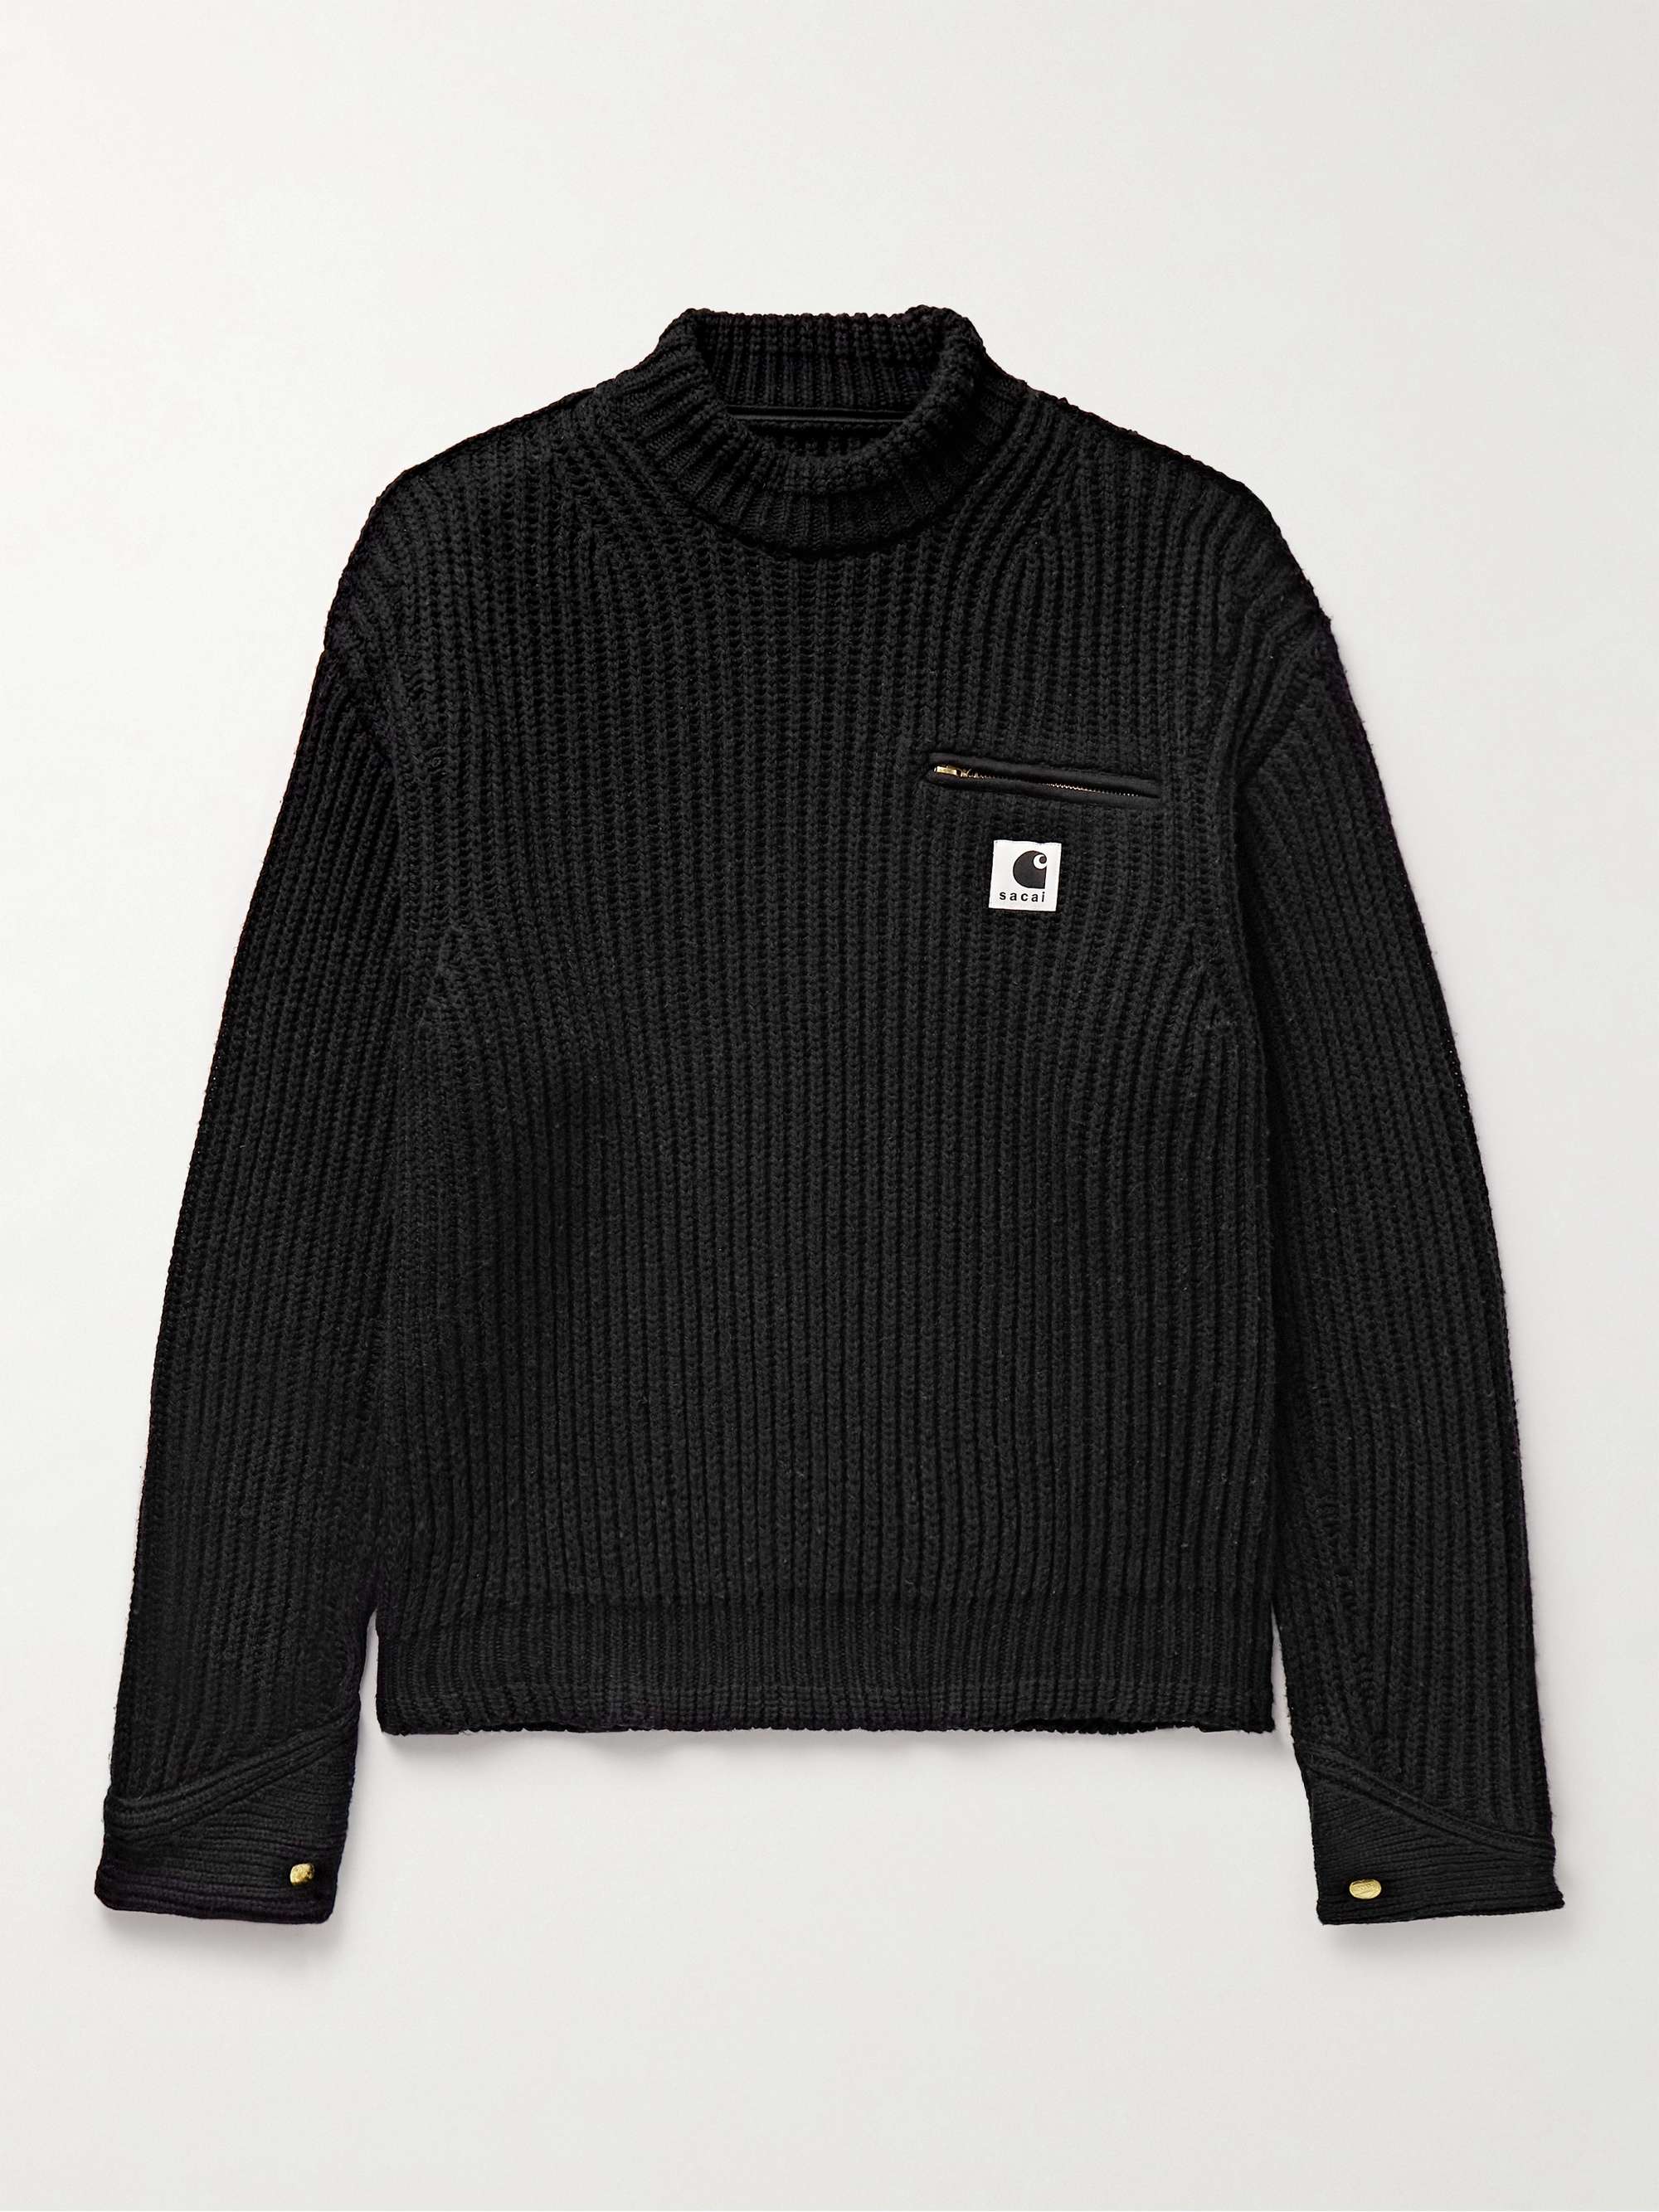 SACAI + Carhartt WIP Detroit Ribbed Wool and Nylon-Blend Sweater